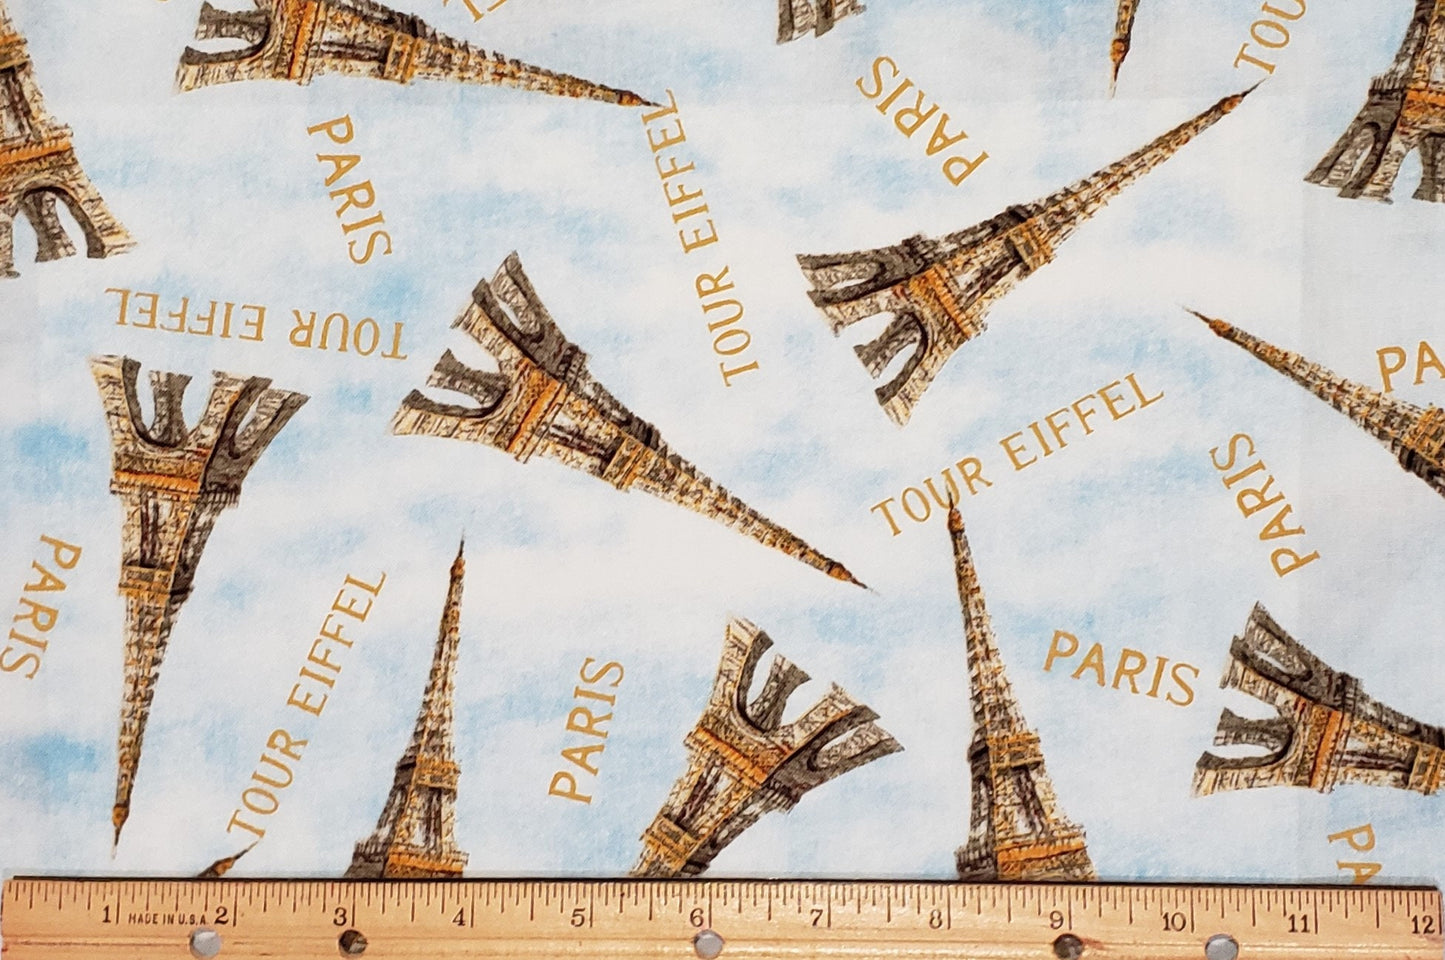 Le Café Panhui Nai Licensed to WP - Eiffel Tower Print on Sky Blue and White Fabric